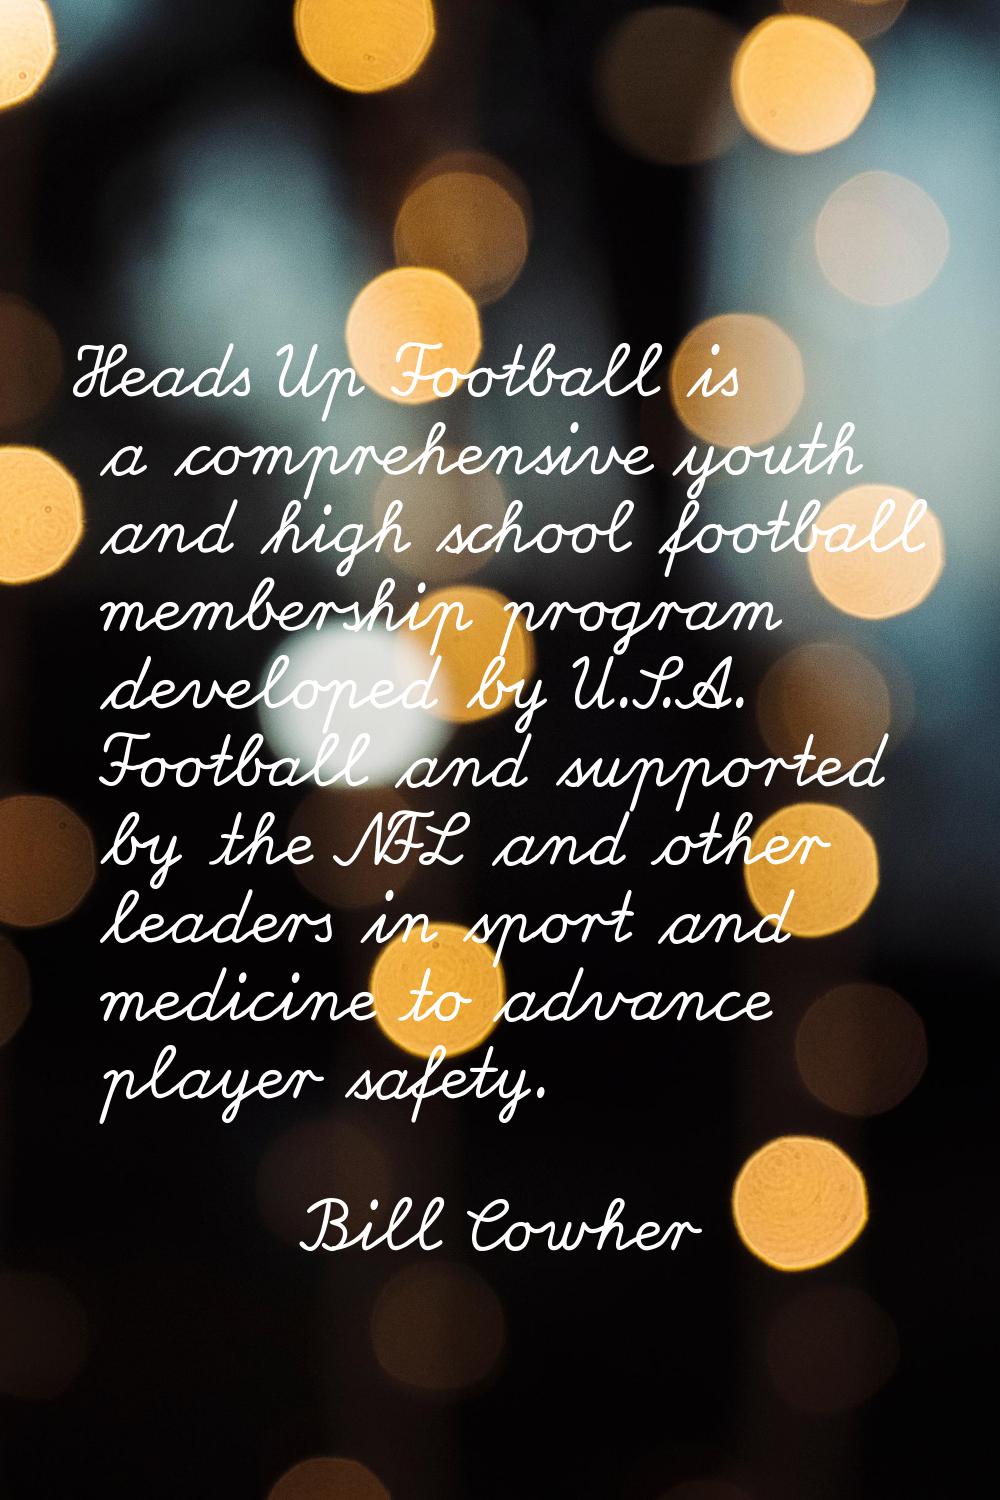 Heads Up Football is a comprehensive youth and high school football membership program developed by